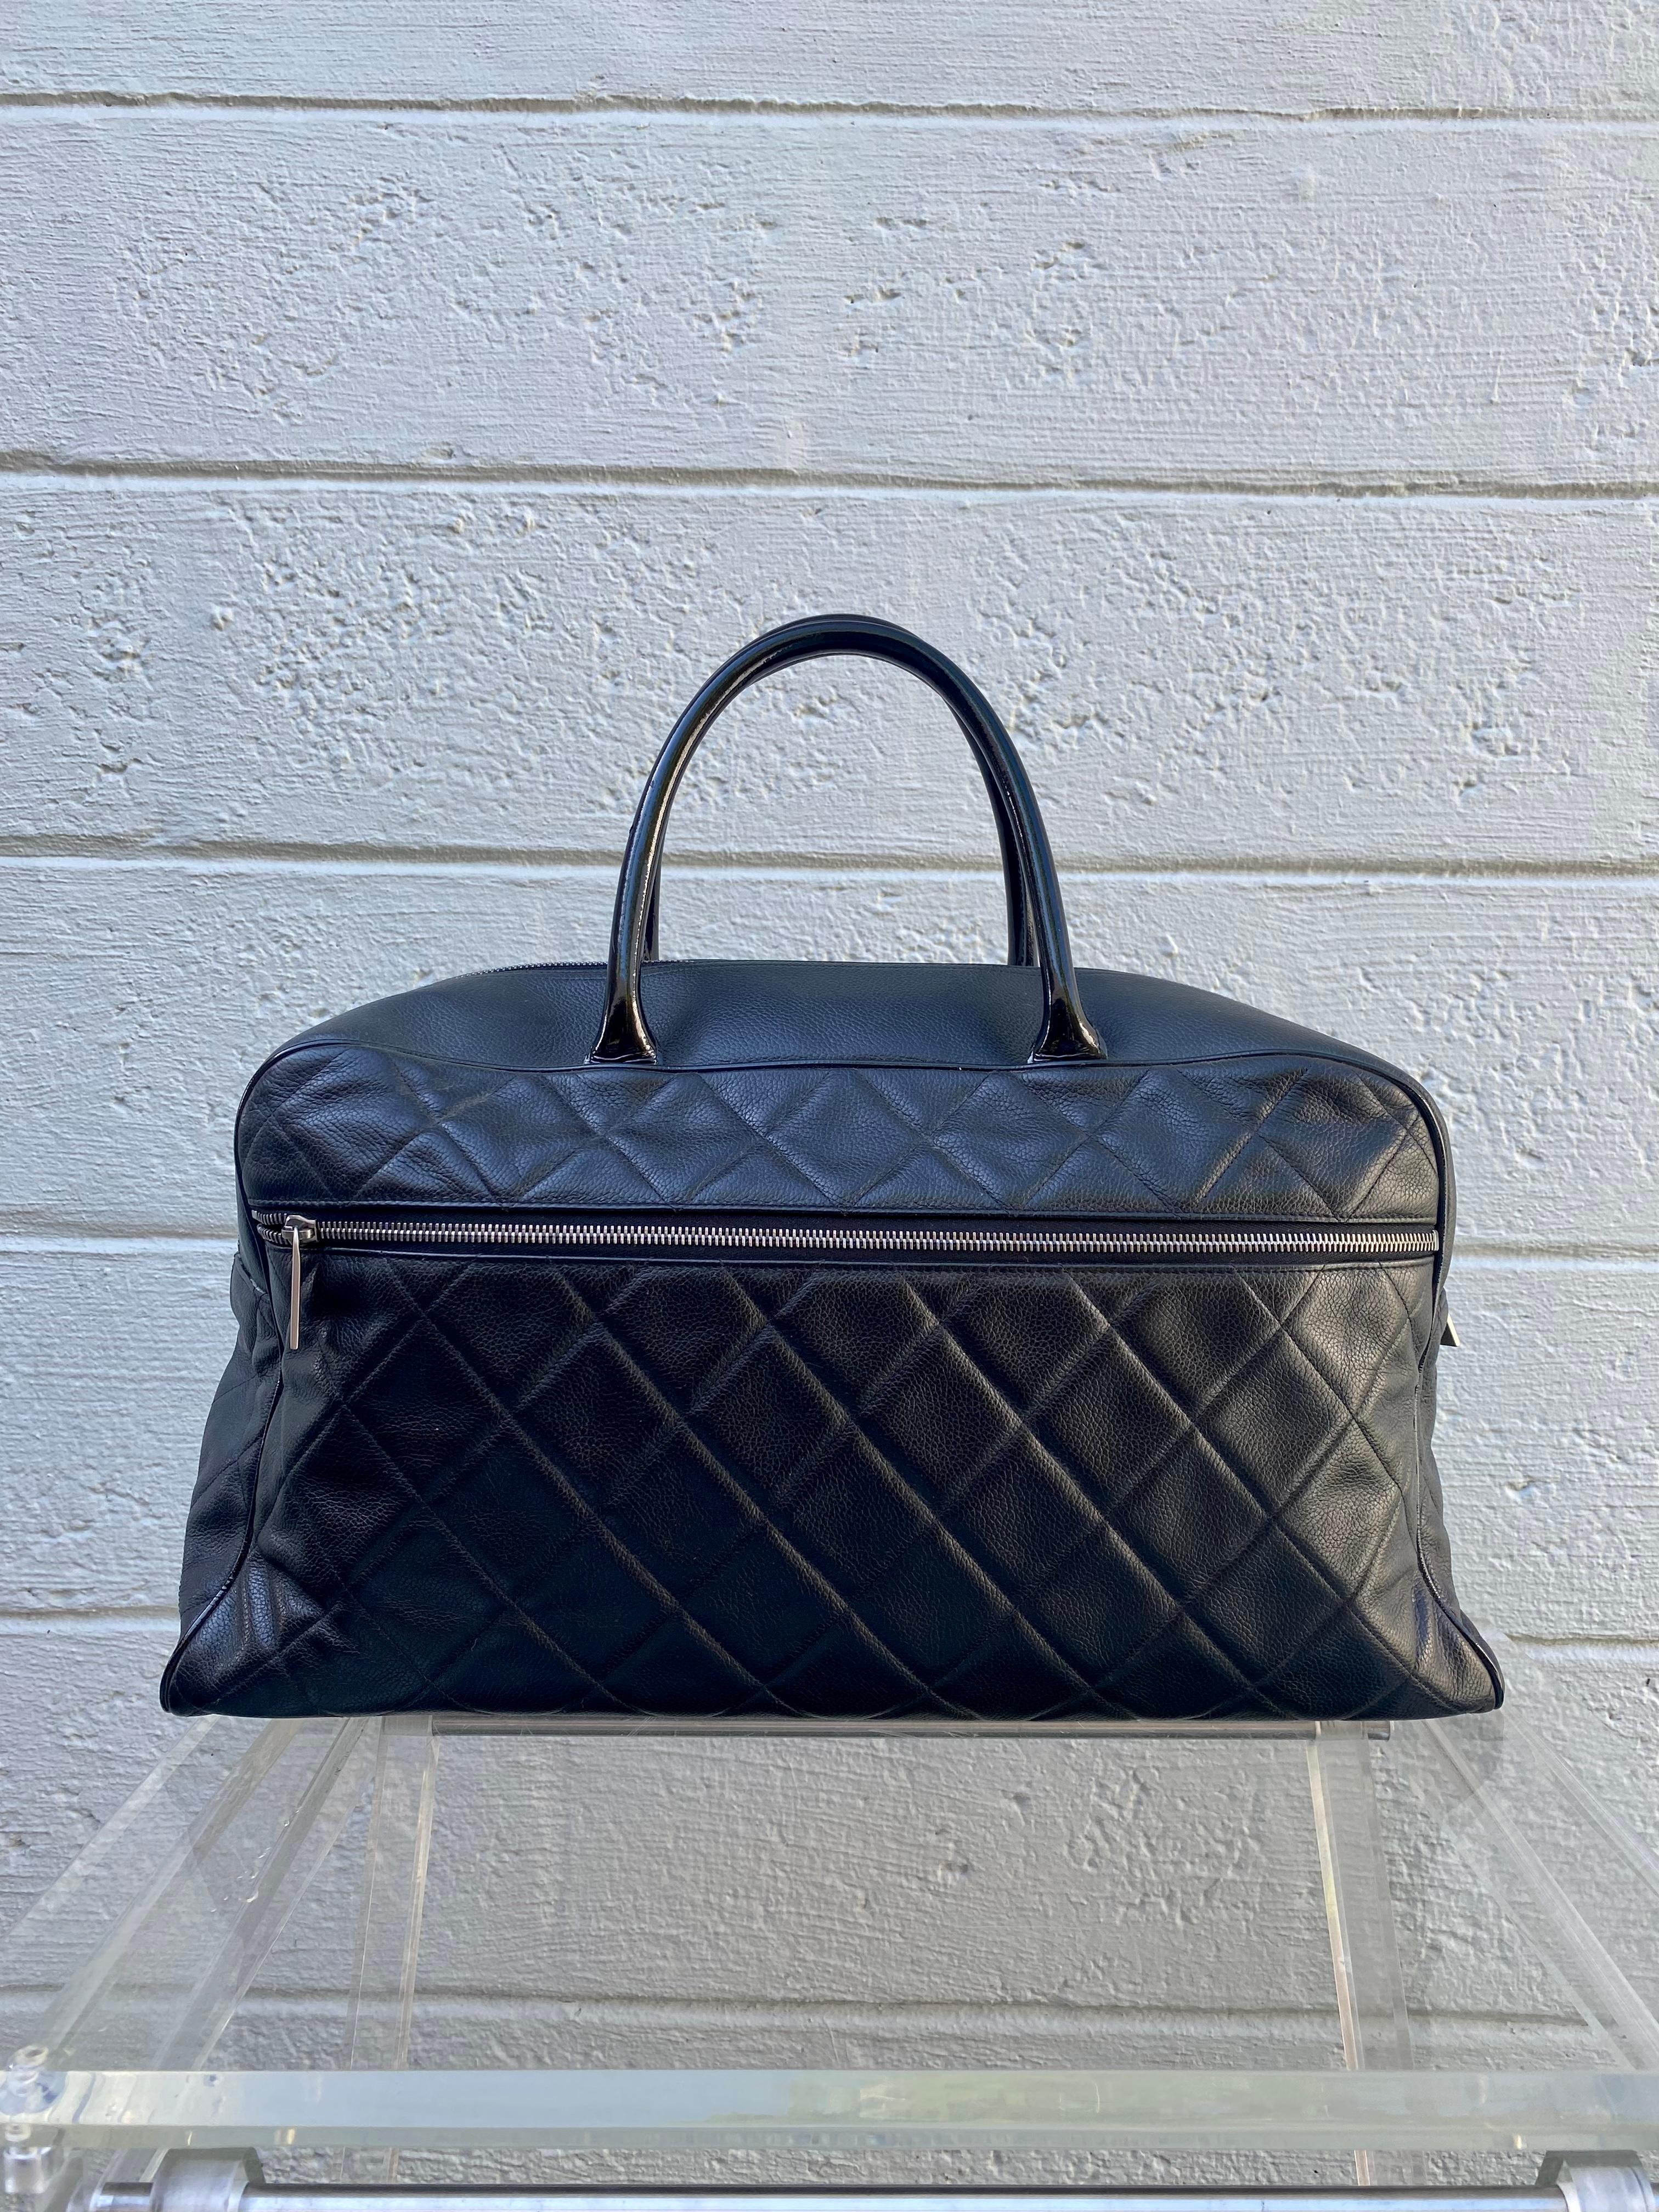 Chanel Rare Vintage Black Caviar Weekender Travel Duffle Shopper Bag In Excellent Condition For Sale In Fort Lauderdale, FL